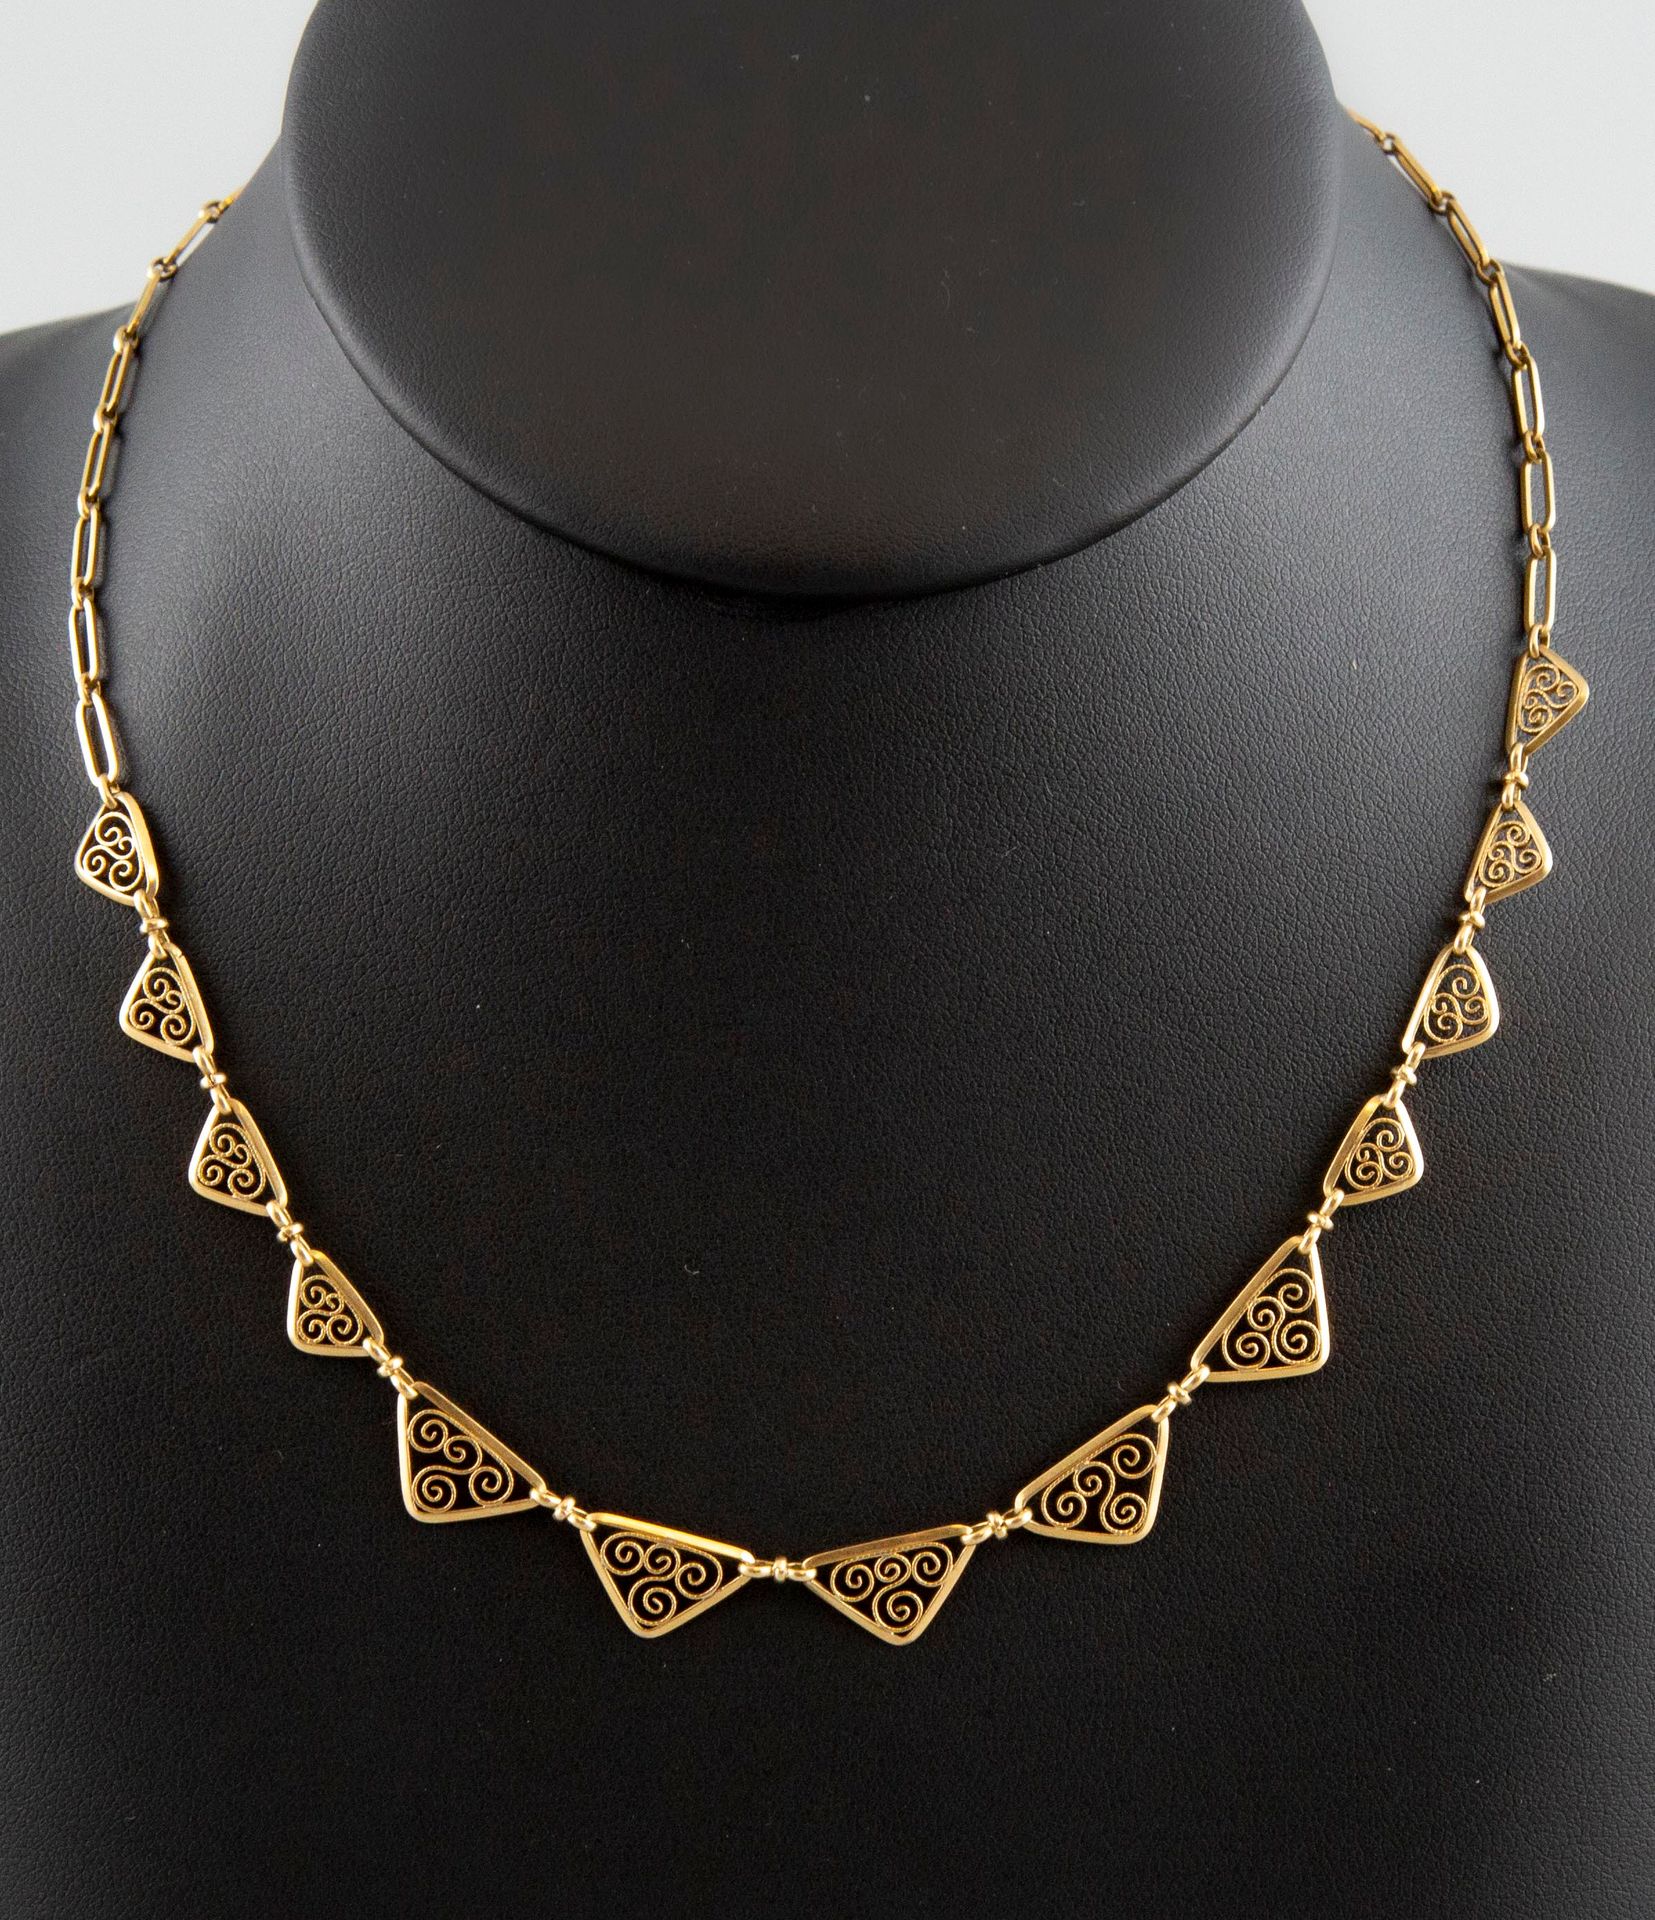 Null Openwork necklace in 18K yellow gold with filigree. Weight 9,2g.